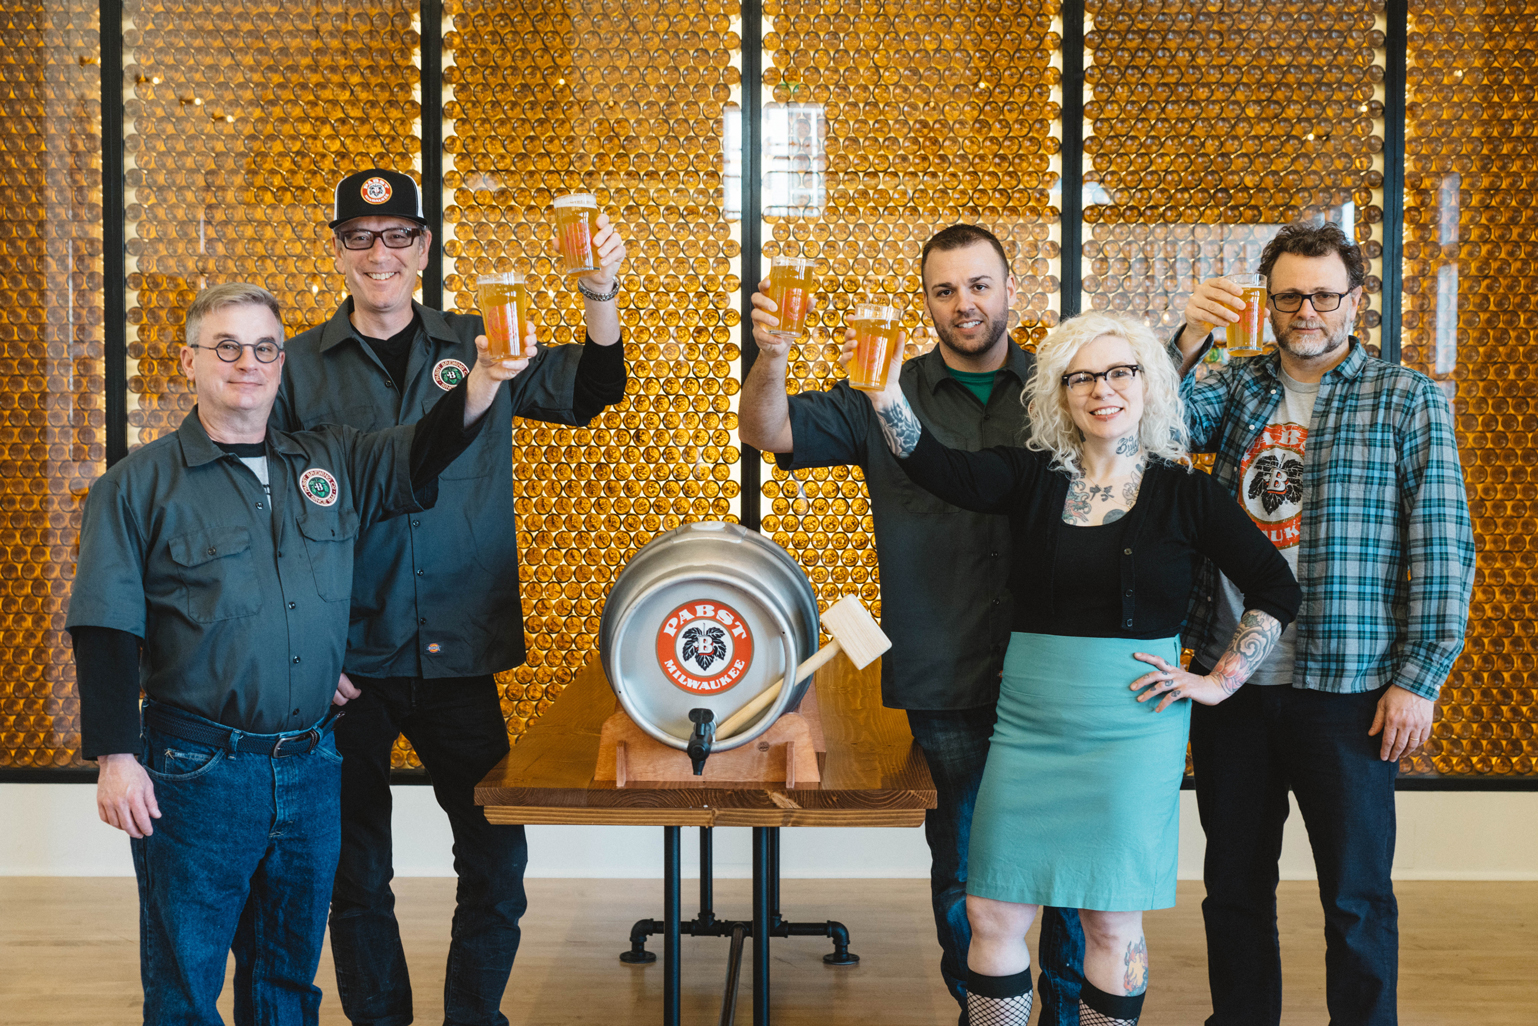 From left, Pabst Brewing Co. Master Brewer Greg Deuhs, CEO Simon Thorpe, Head Brewer John Kimes, Experience Manager Rebecca Berkshire, and Chairman Eugene Kashper toast after a ceremonial firkin keg t